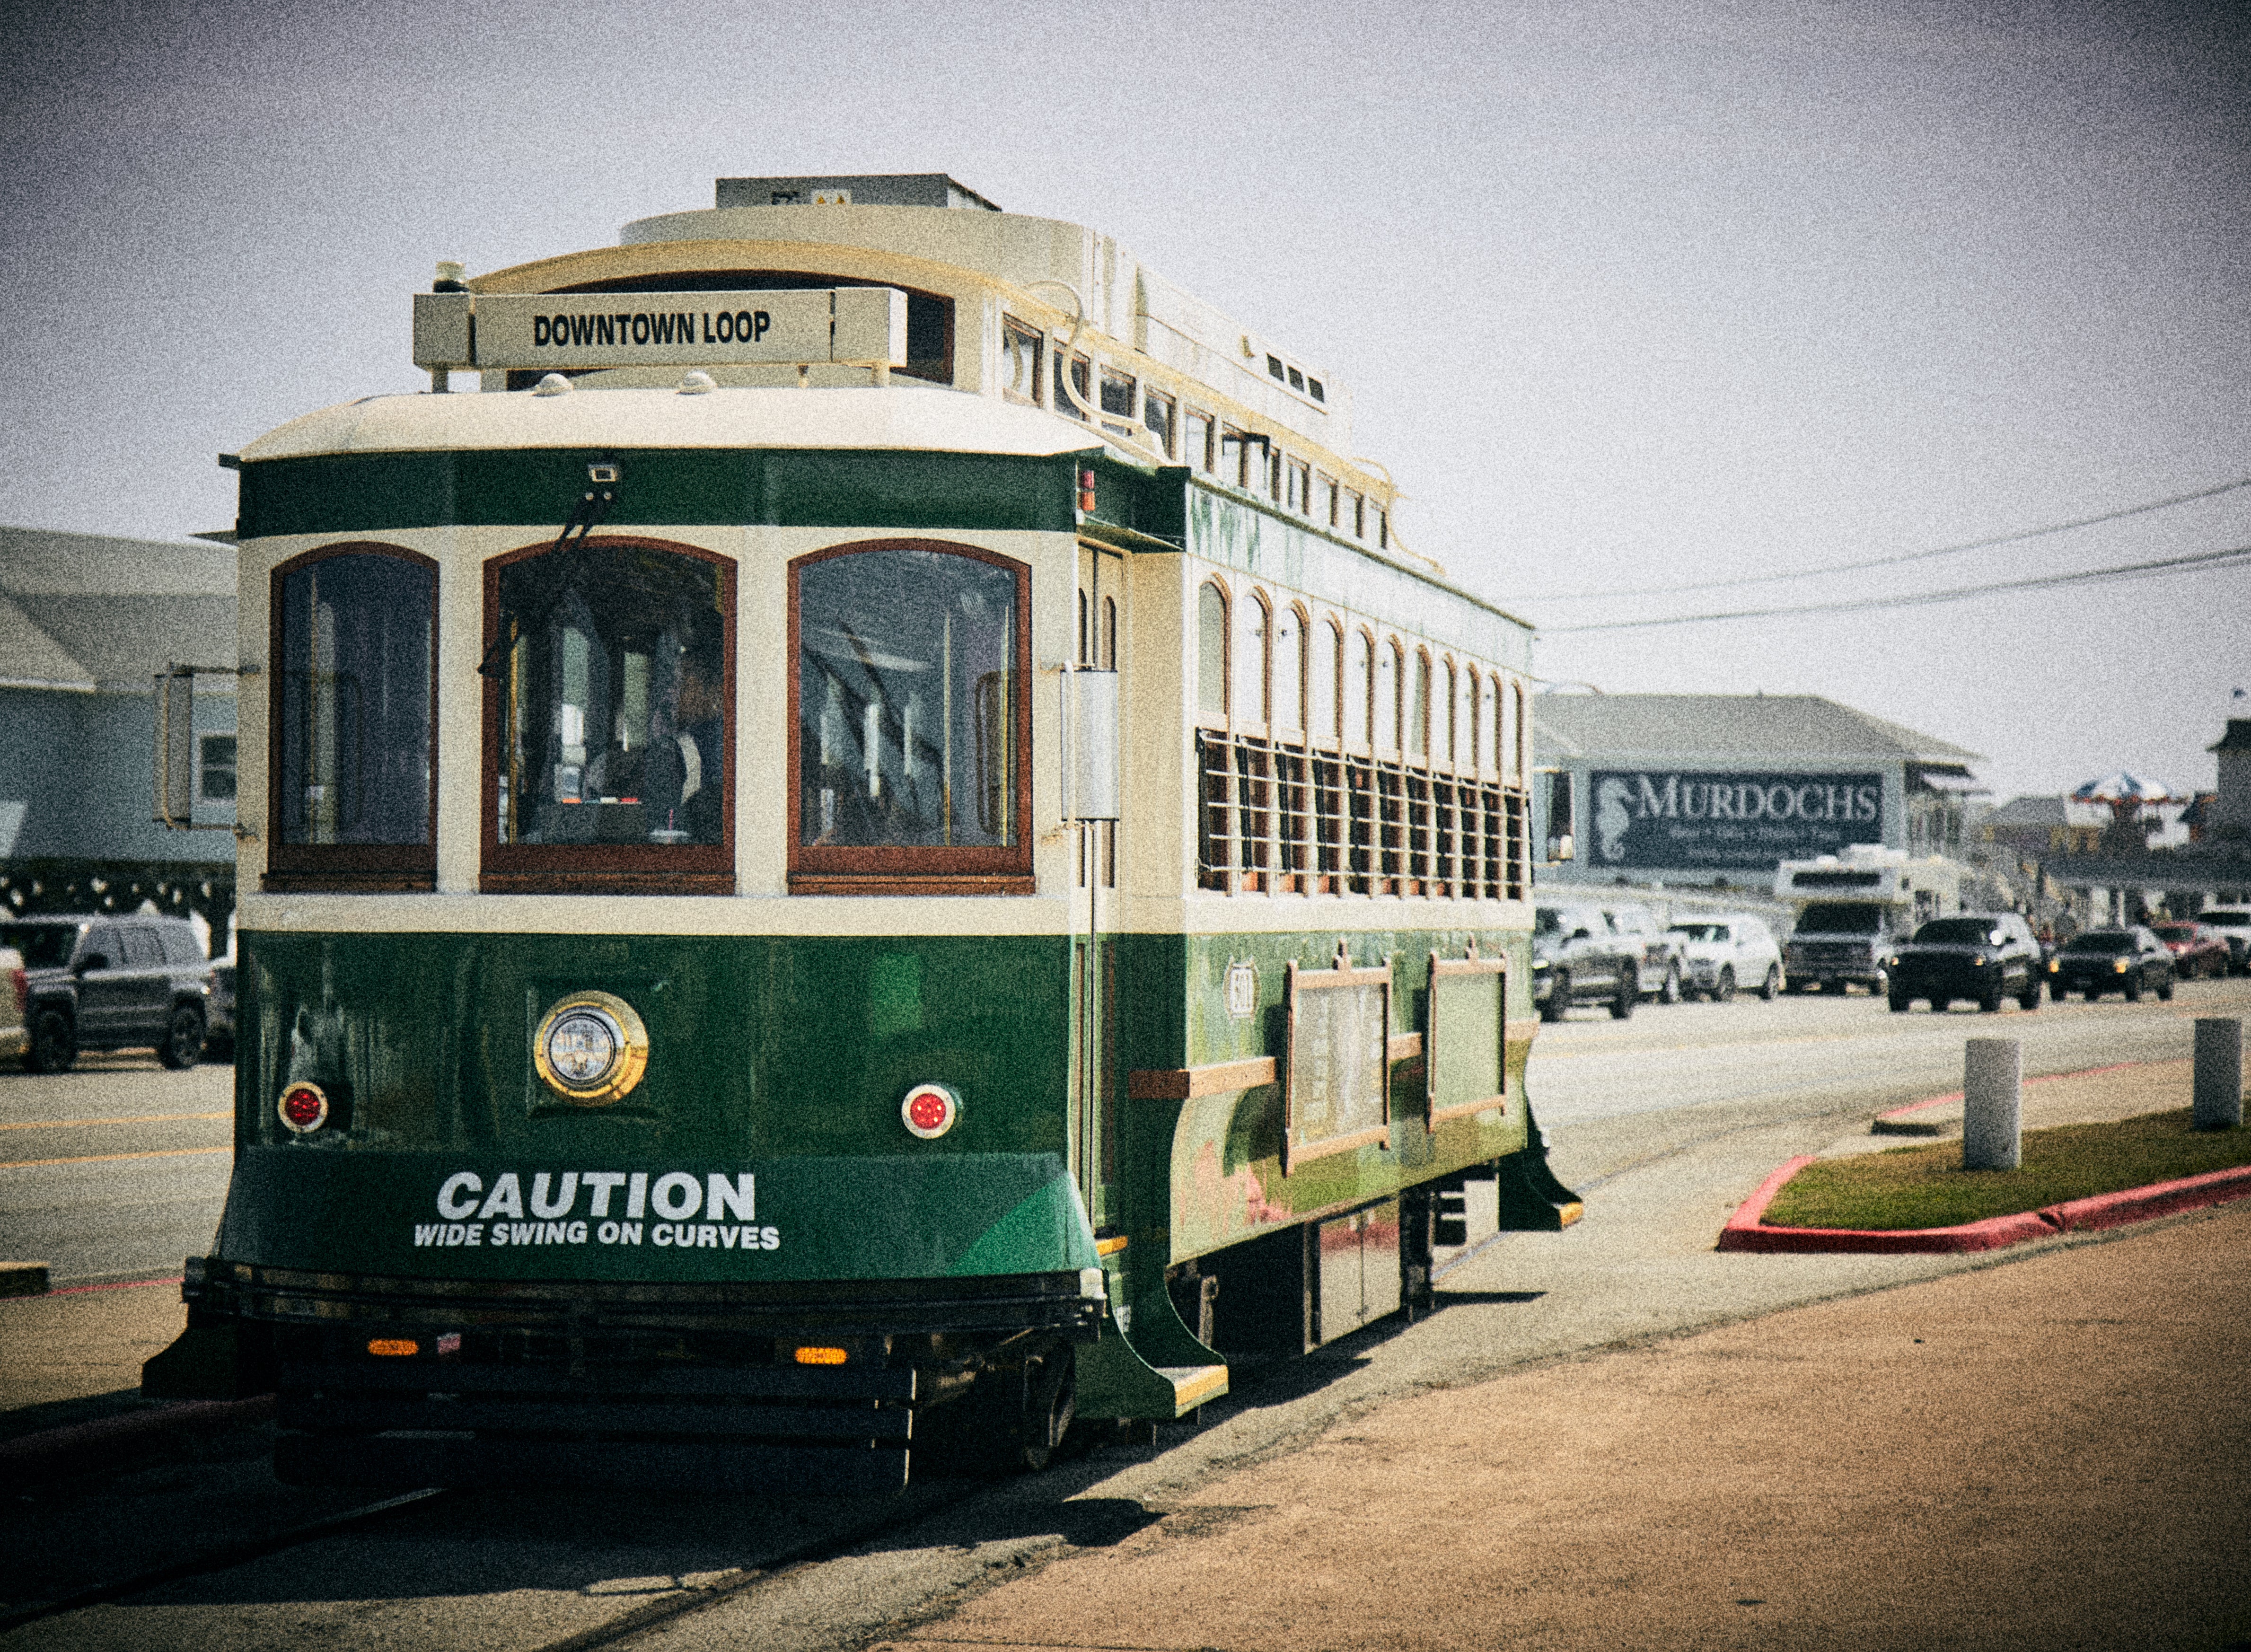 Climb aboard and take a ride back in time!